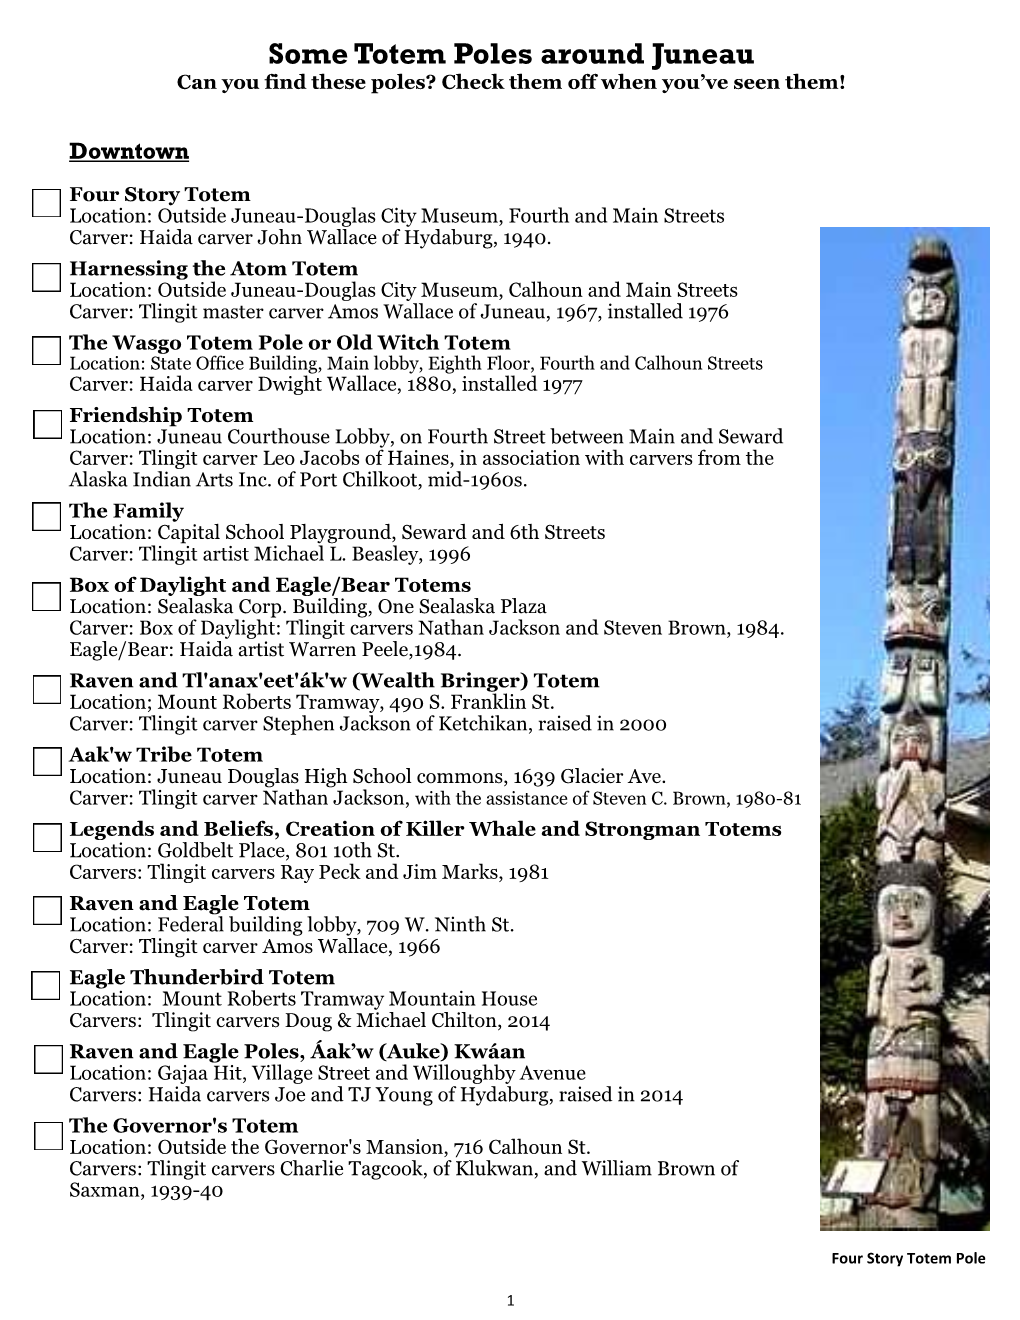 Some Totem Poles Around Juneau Can You Find These Poles? Check Them Off When You’Ve Seen Them!